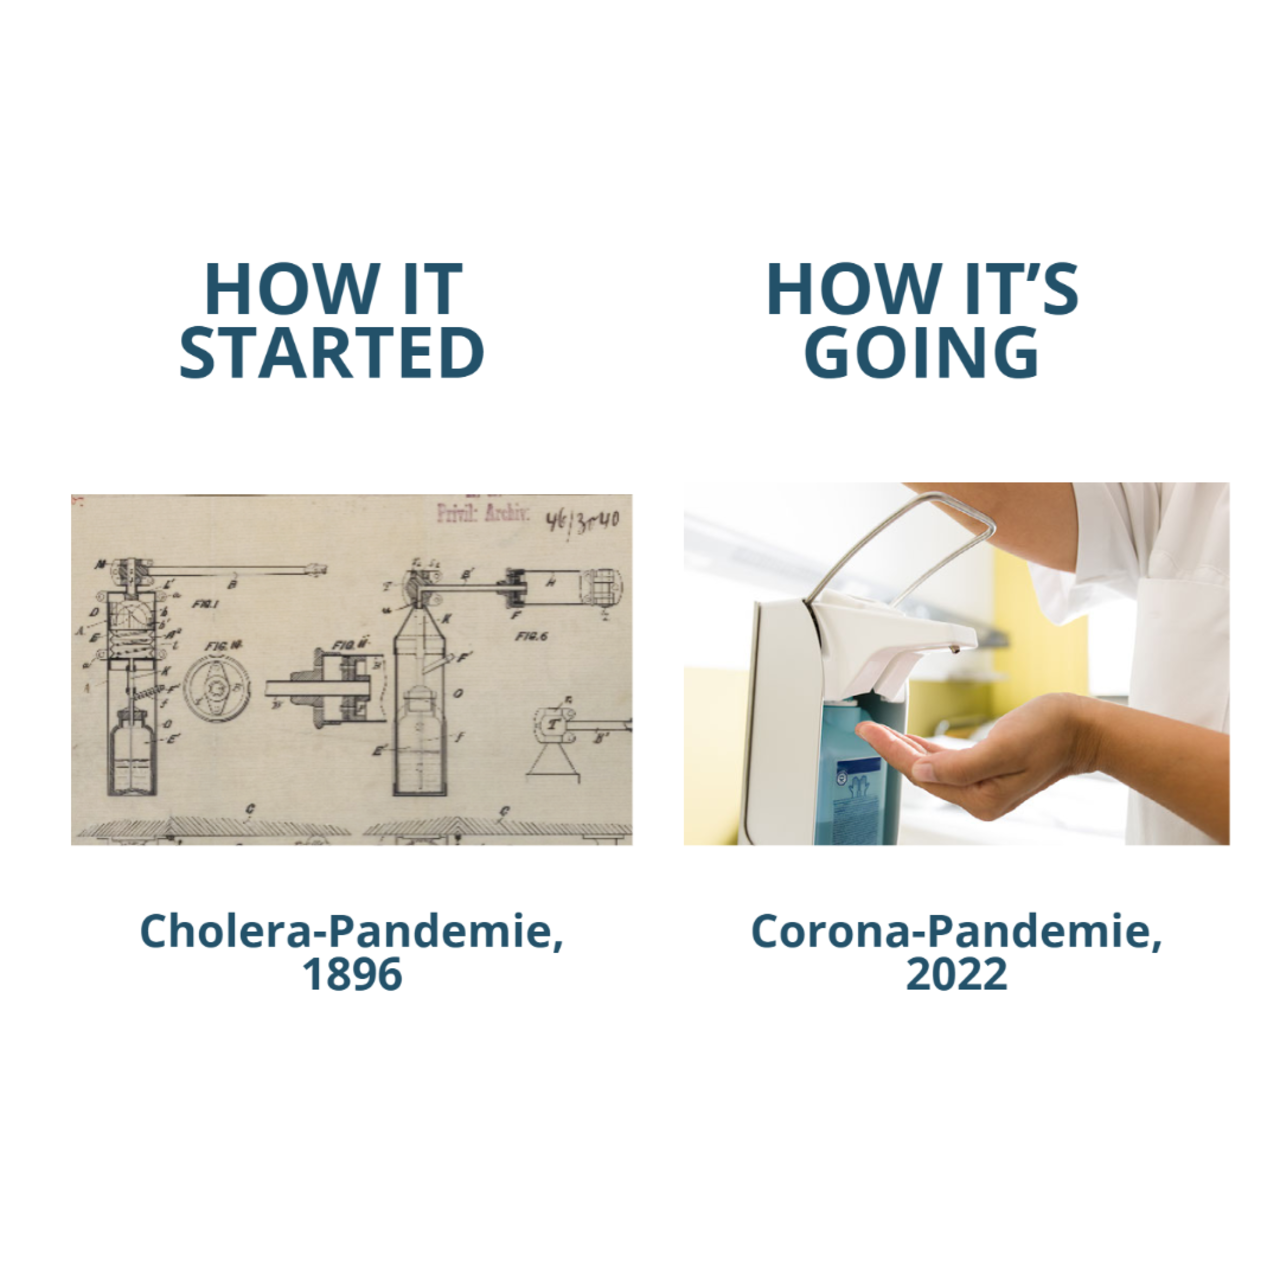 How it started: Cholera-Pandemie, 1896. How it's going: Corona-Pandemie, 2022.